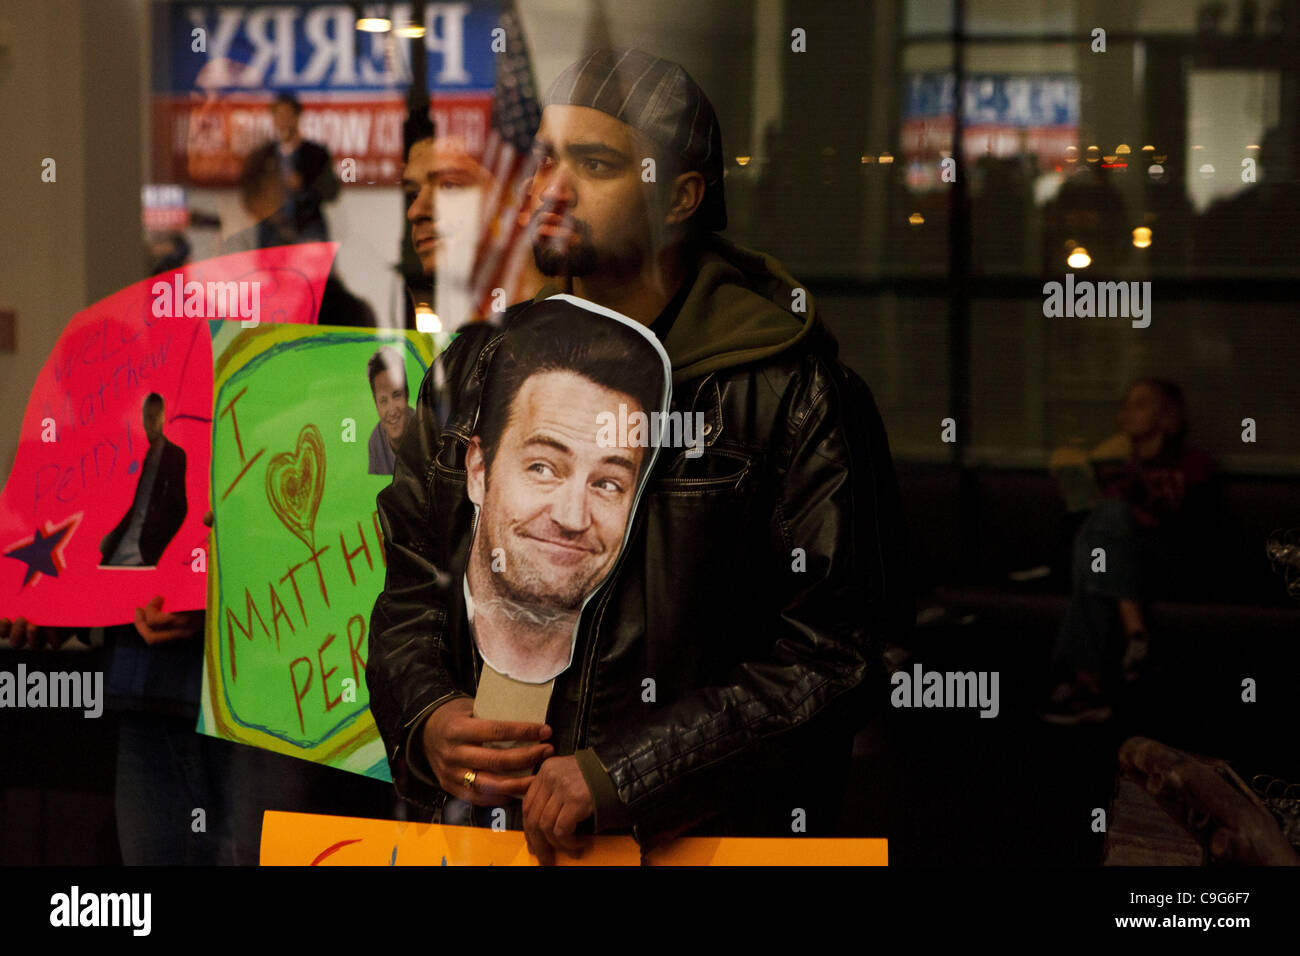 Dec. 20, 2011 - Davenport, Iowa, U.S. - People hold up signs with faces of Matthew Perry from the ''FRIENDS'' television show - satirically claiming they thought Matthew Perry and Chandler were supposed to visit - while Republican presidential candidate Texas Gov. Rick Perry speaks during a campaign Stock Photo